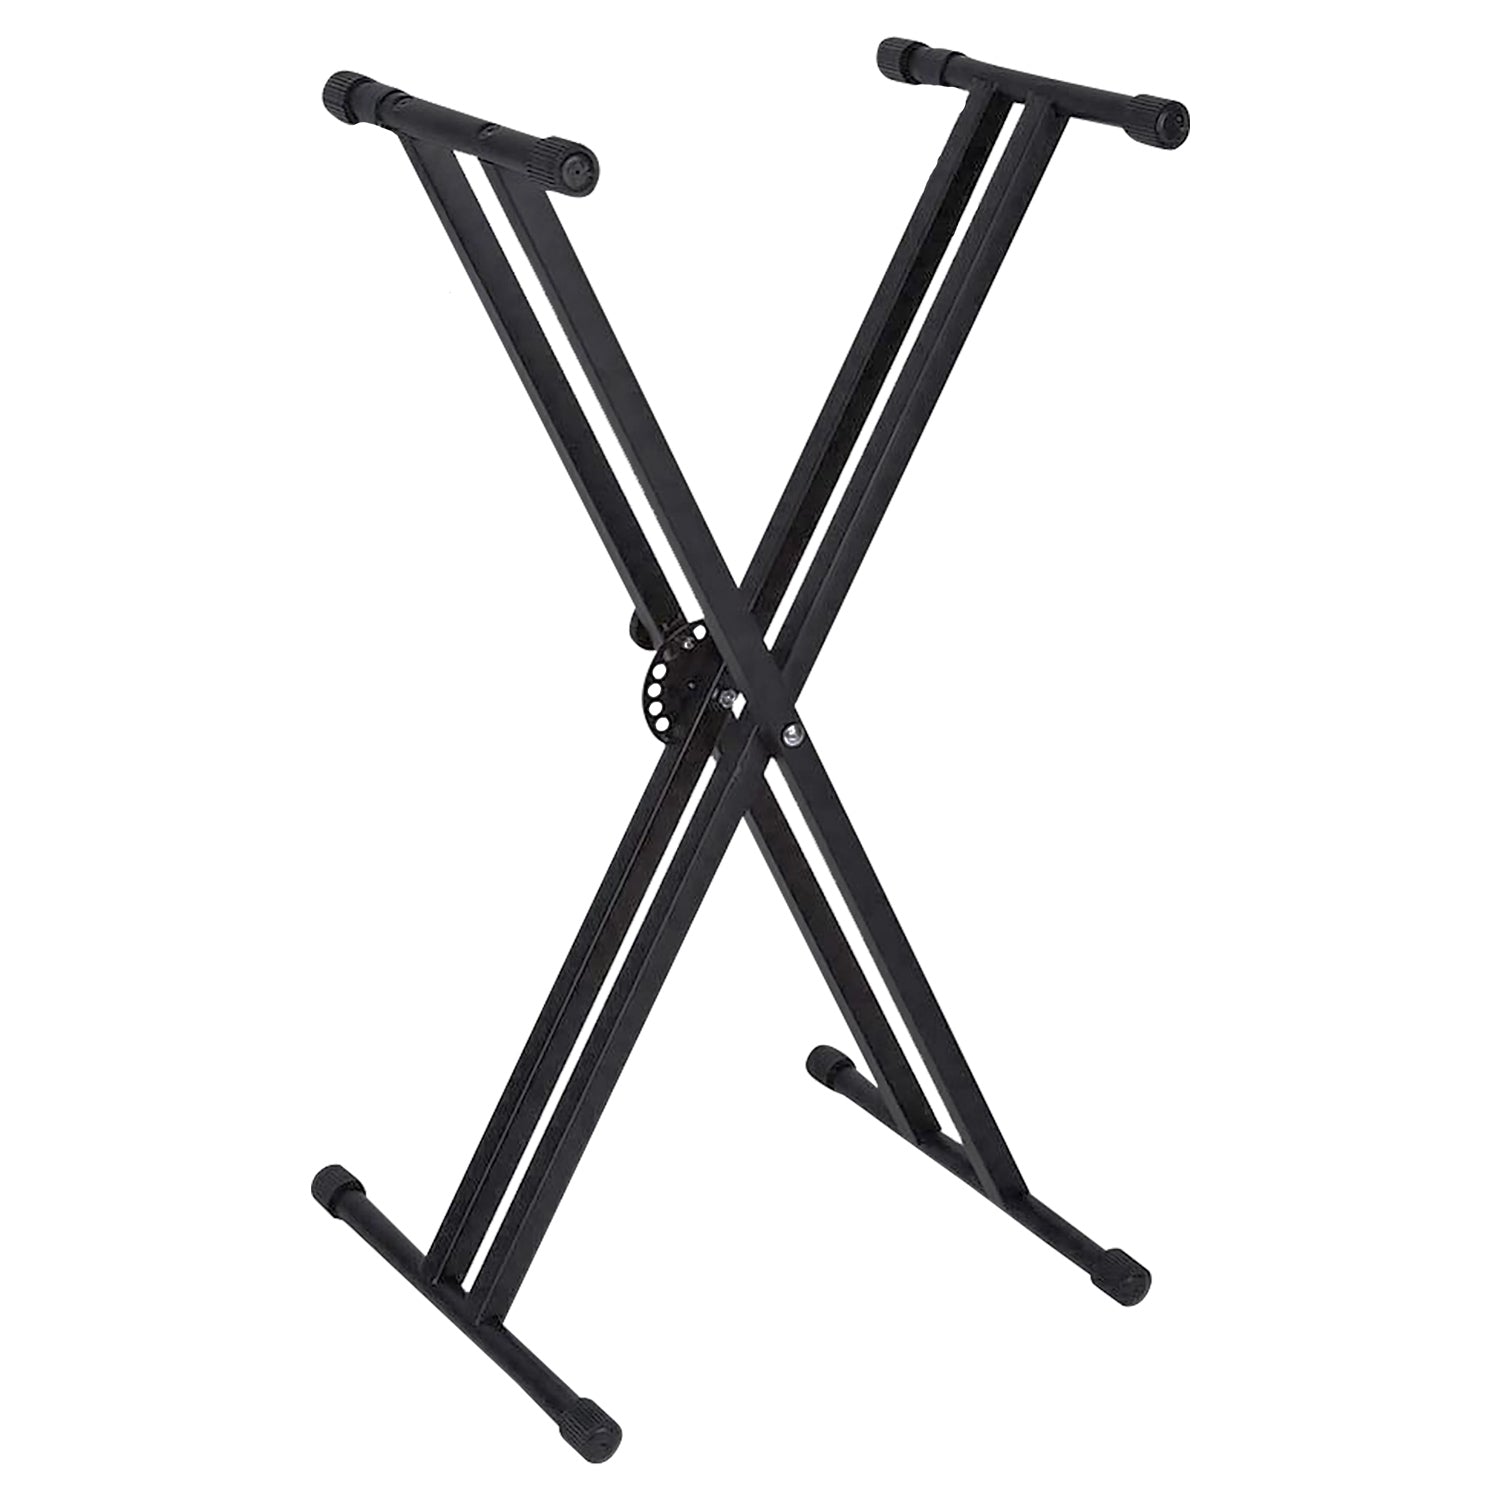 5 Core Piano Stand Double Braced Adjustable Keyboard Stands Metal X Style On Stage Keyboard Seat Durable & Sturdy Easy To Assemble -KS 2X